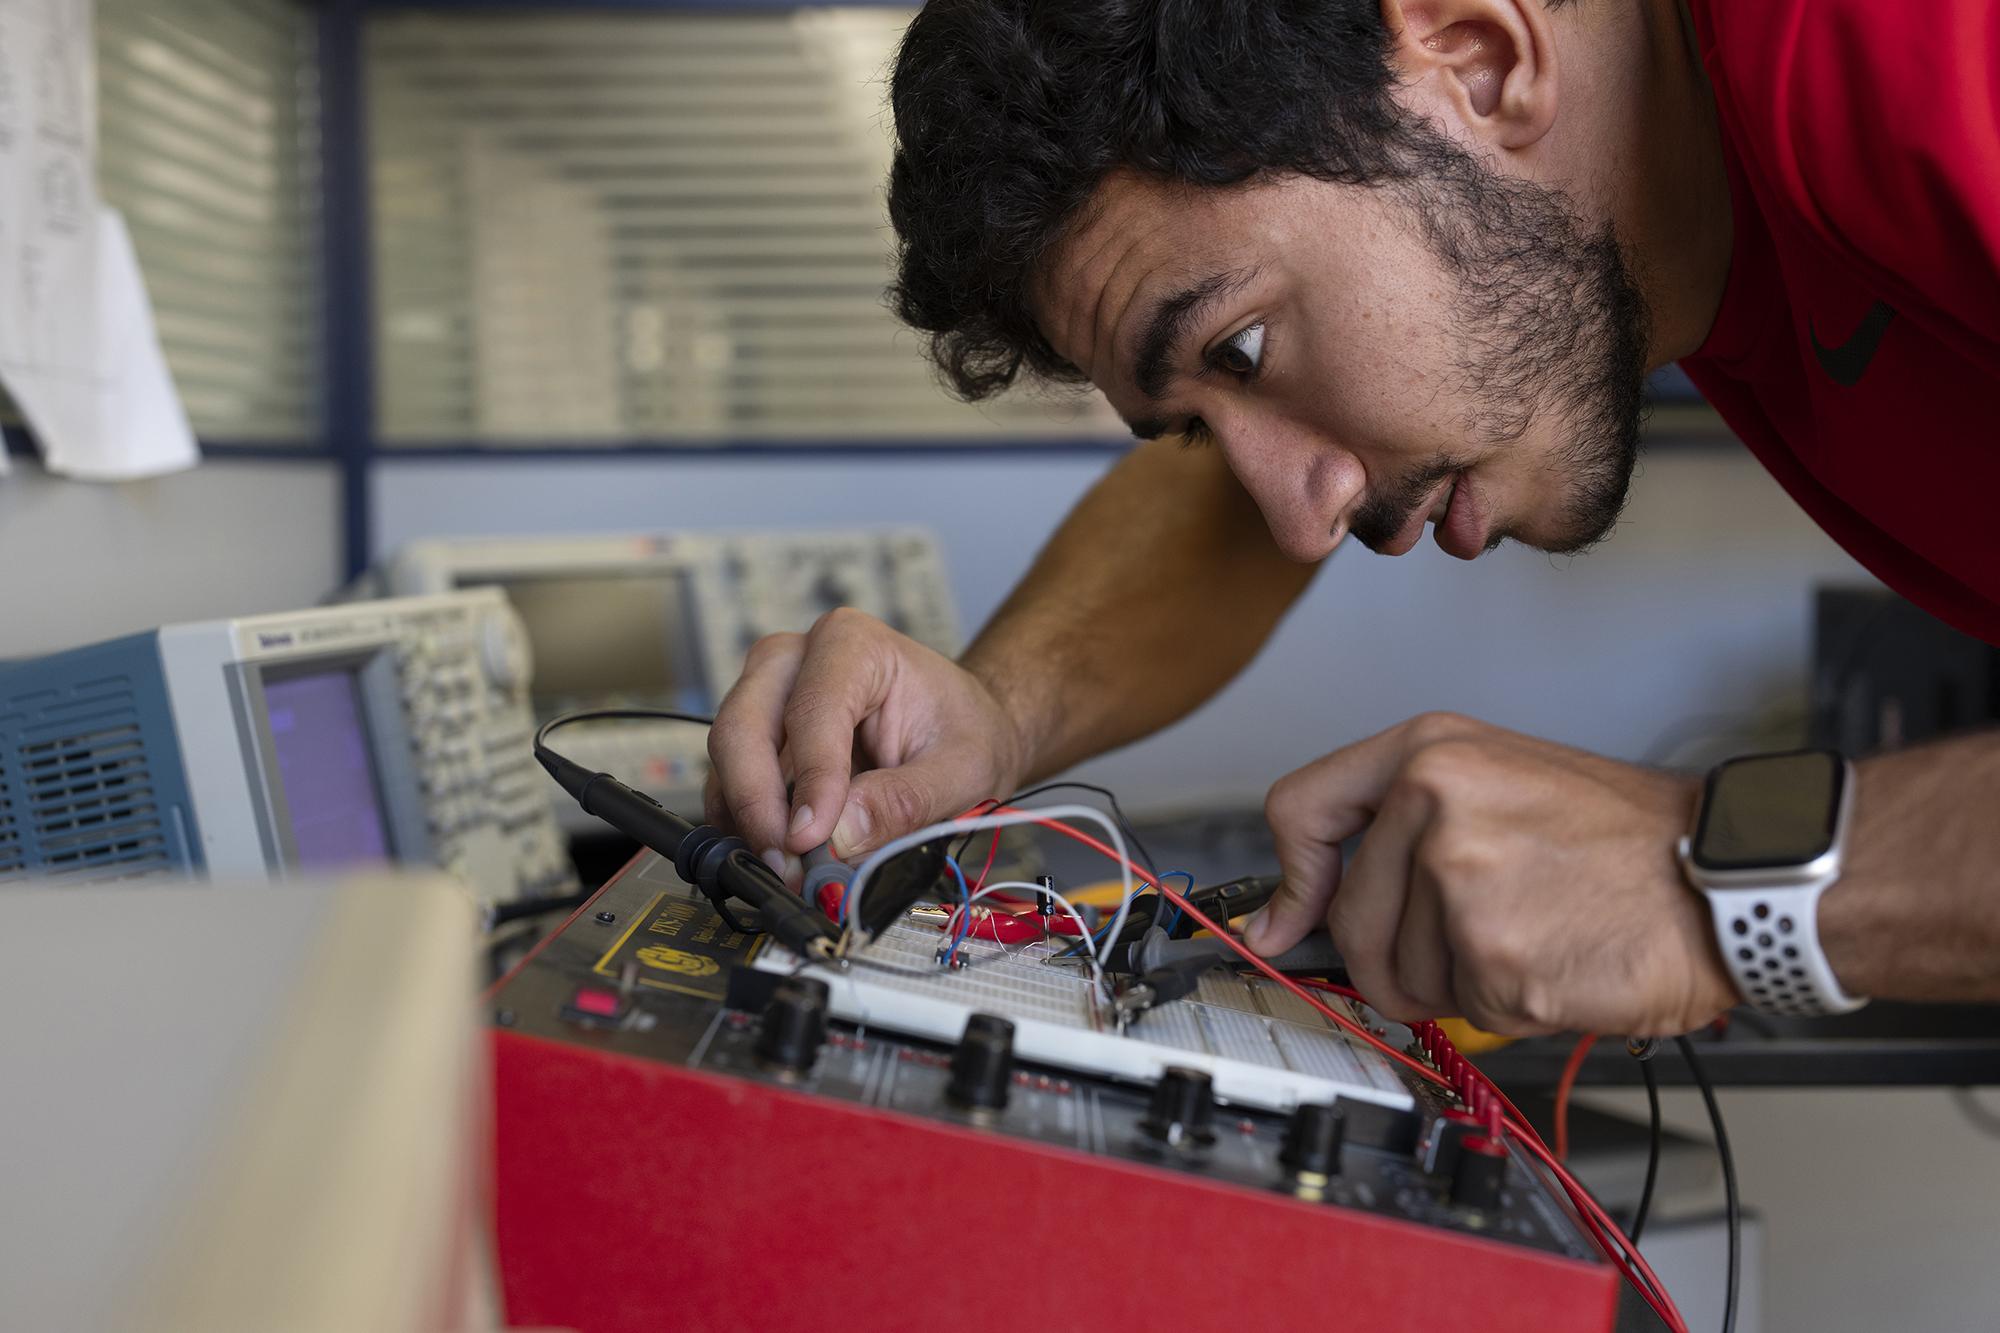 Student working with electronics equipment in engineering lab